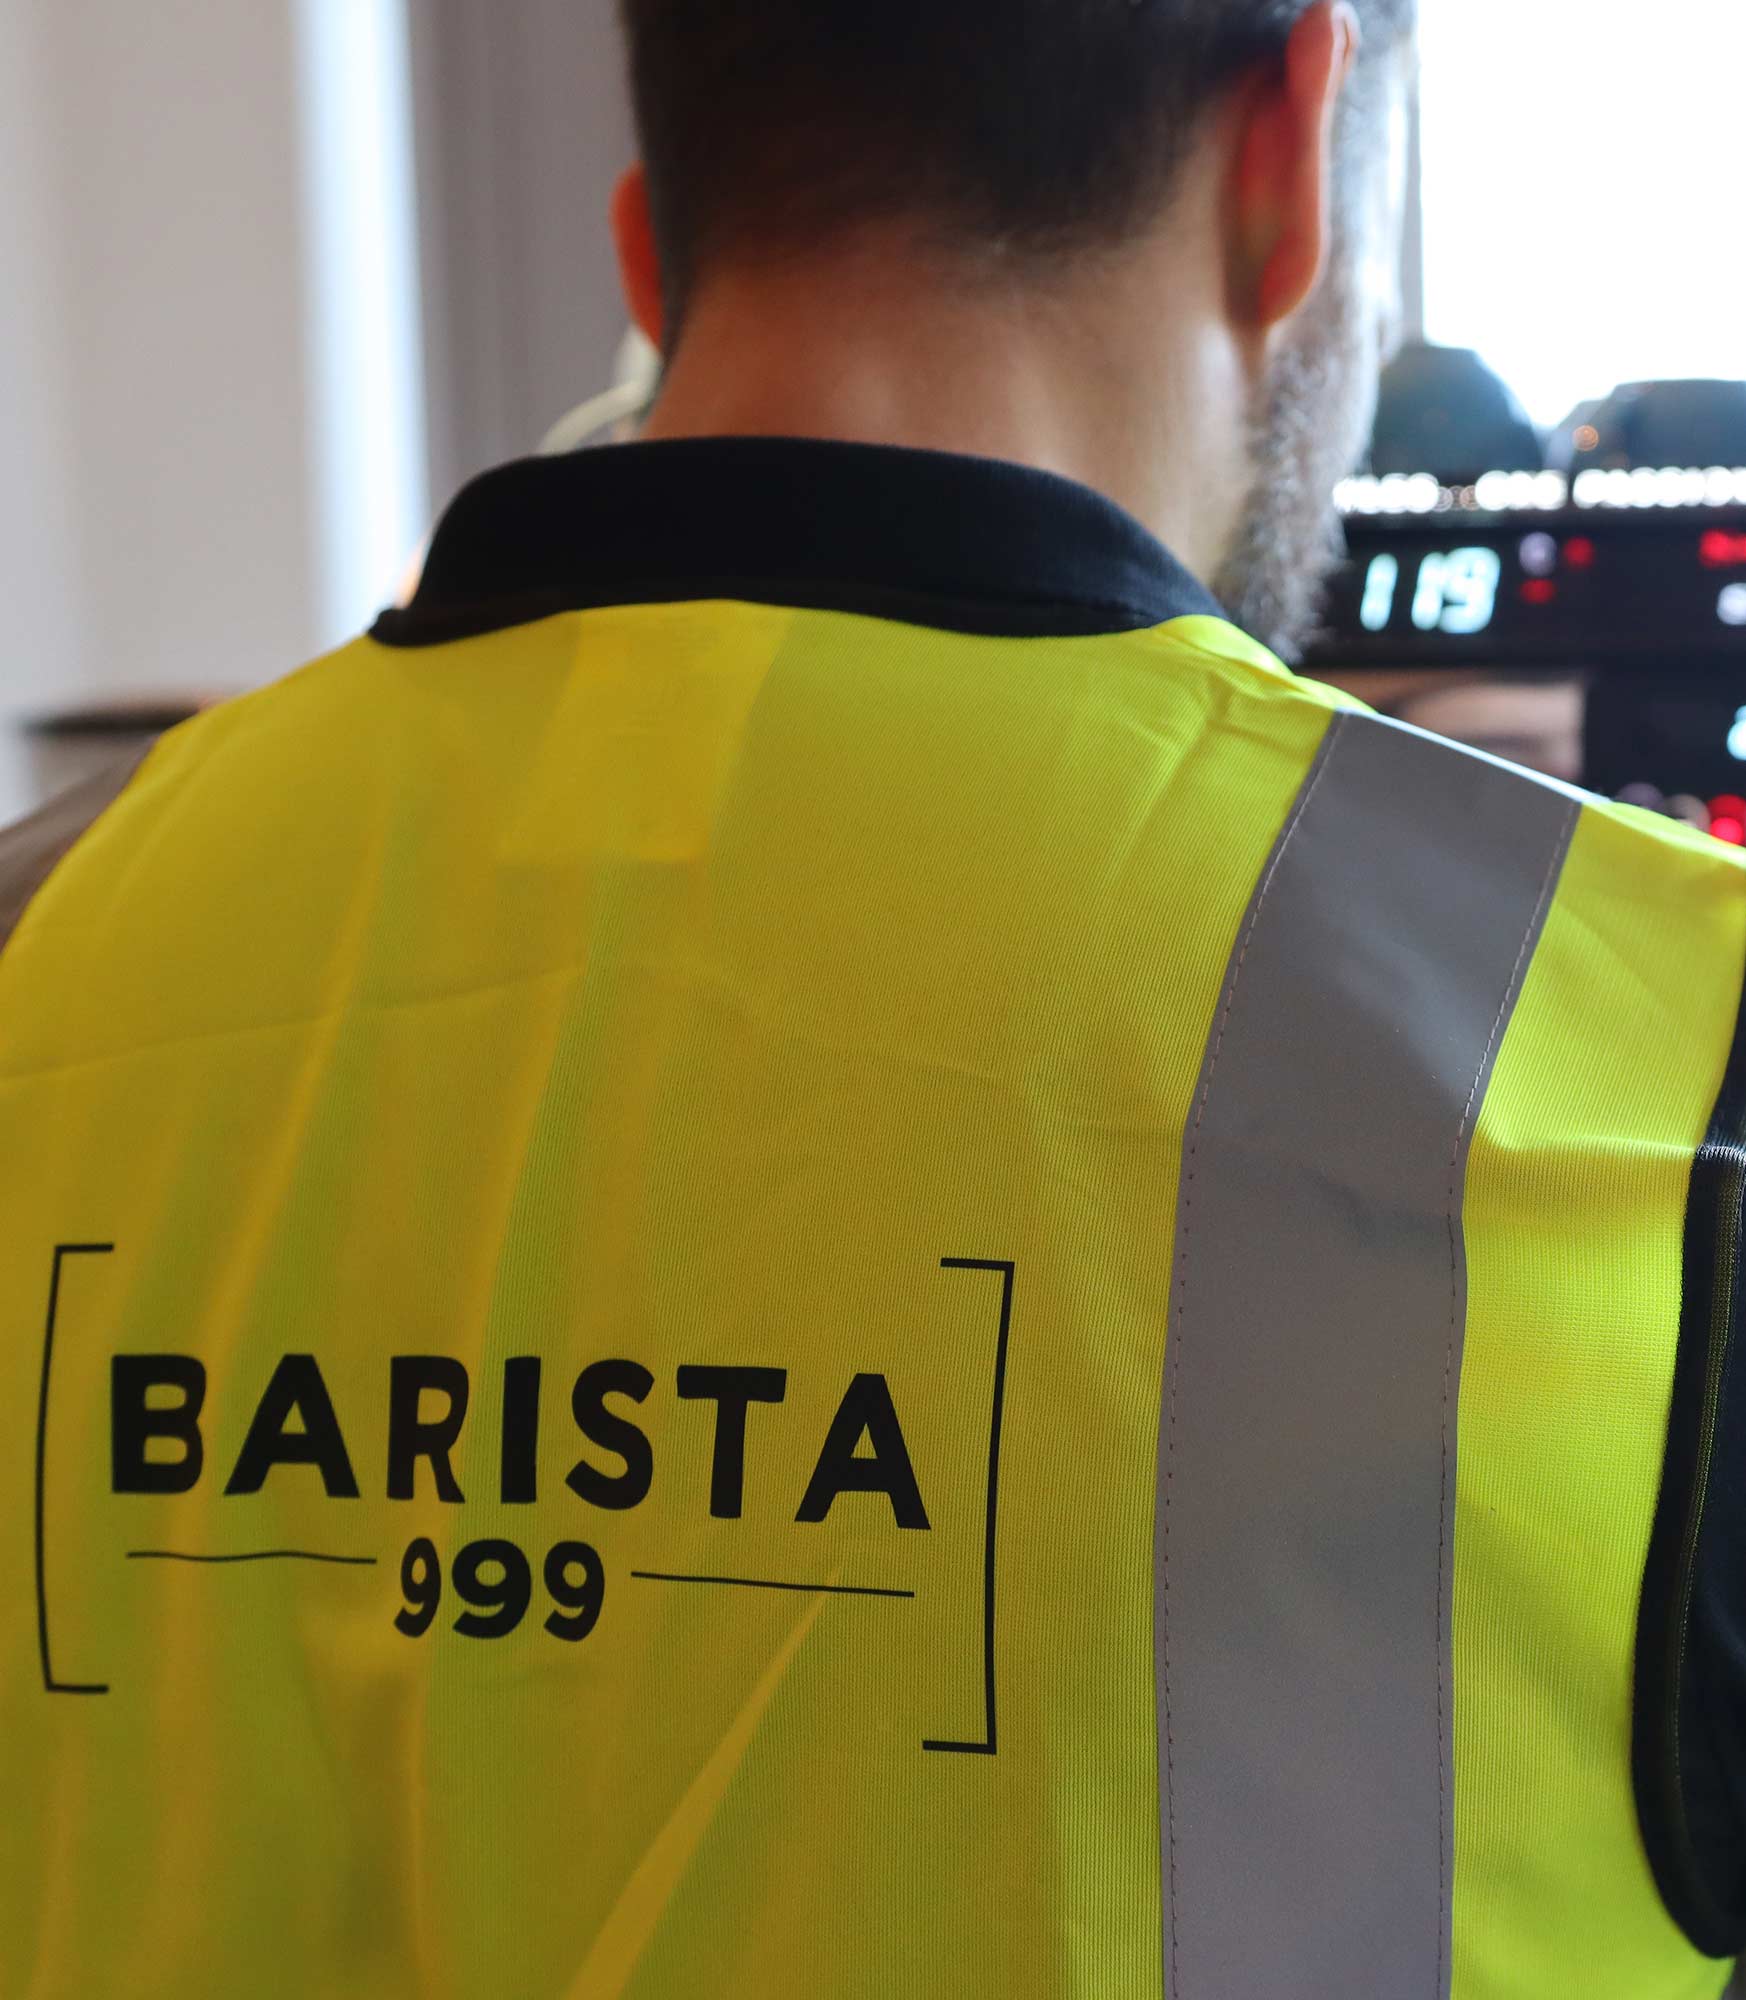 Barista 999 Coffee shop machine emergency call-out